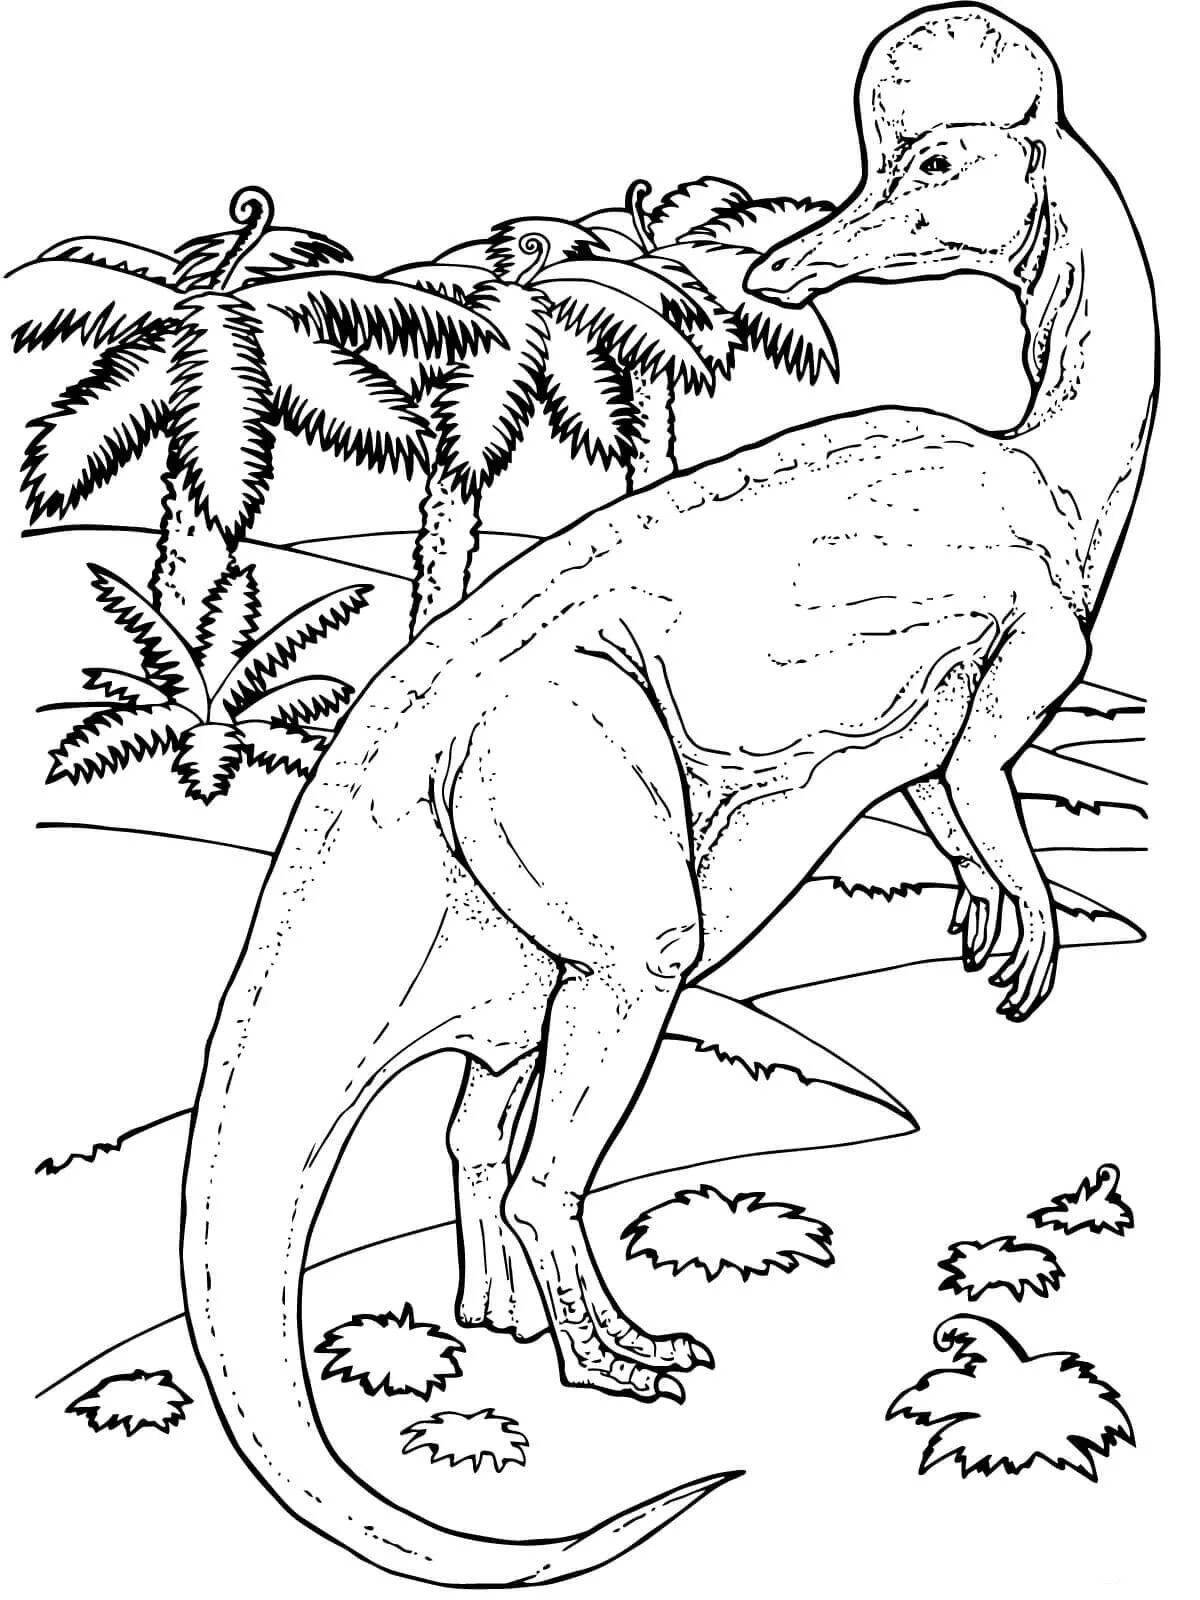 Coloring book exquisite world of dinosaurs